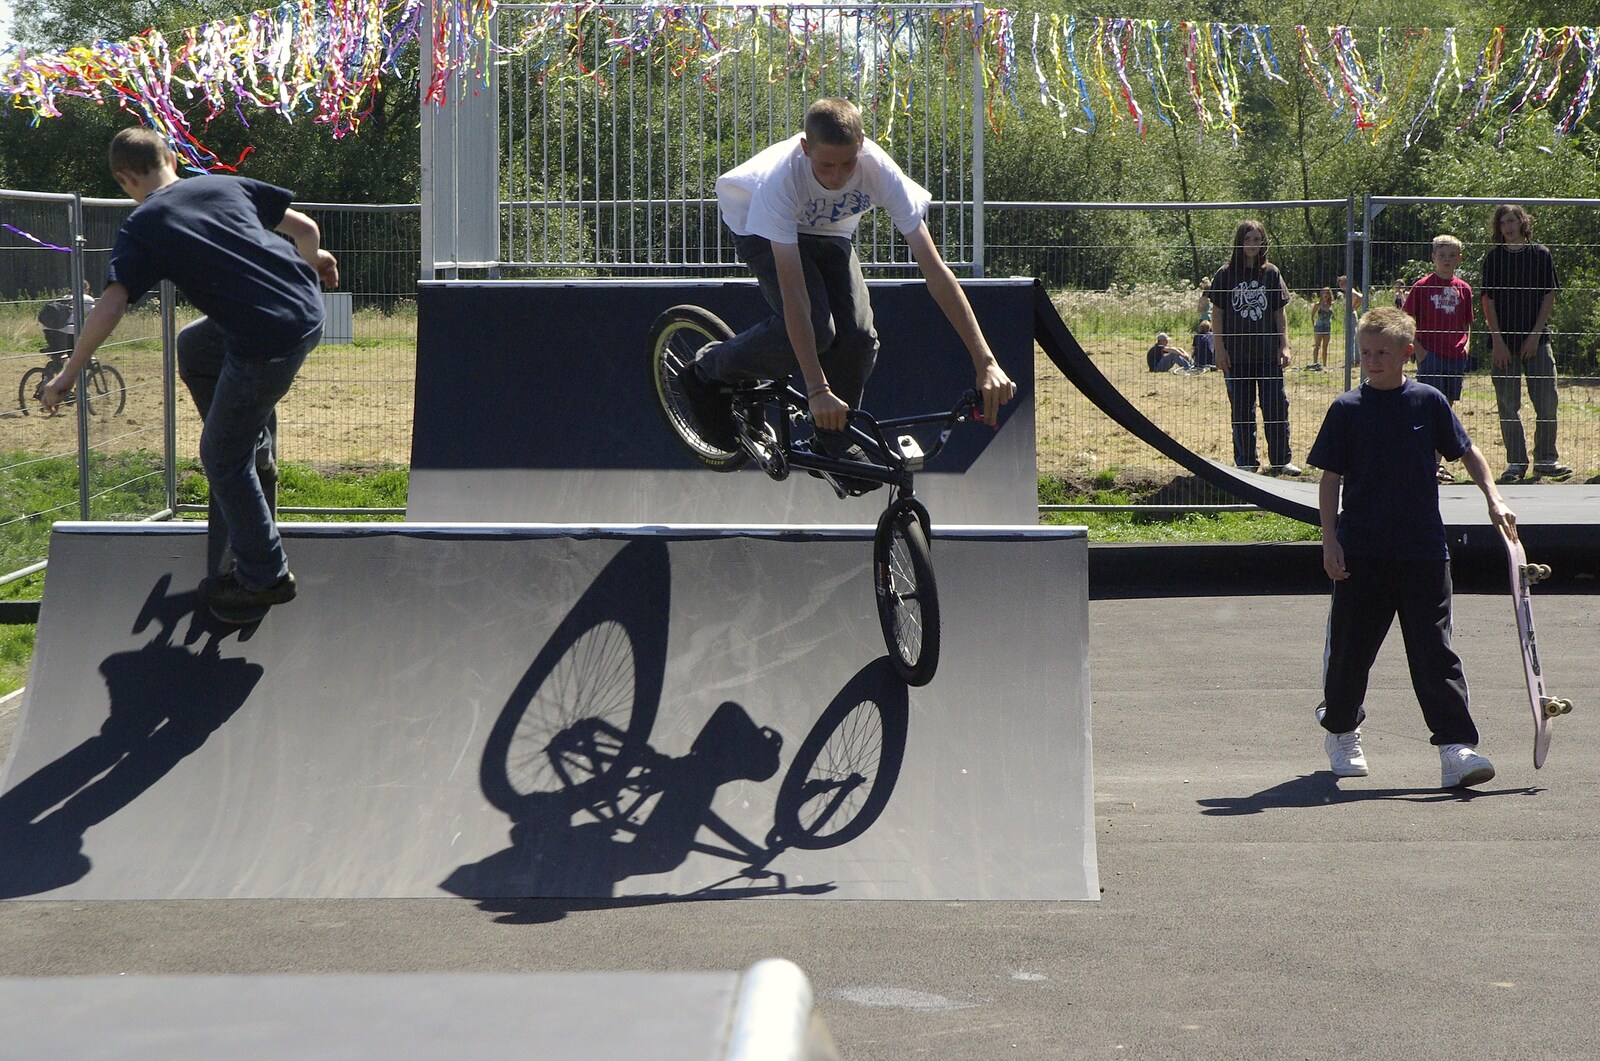 The Opening of Eye Skateboard Park, and The BBs at Cotton, Suffolk - 5th August 2007: Boards and bikes do their thing